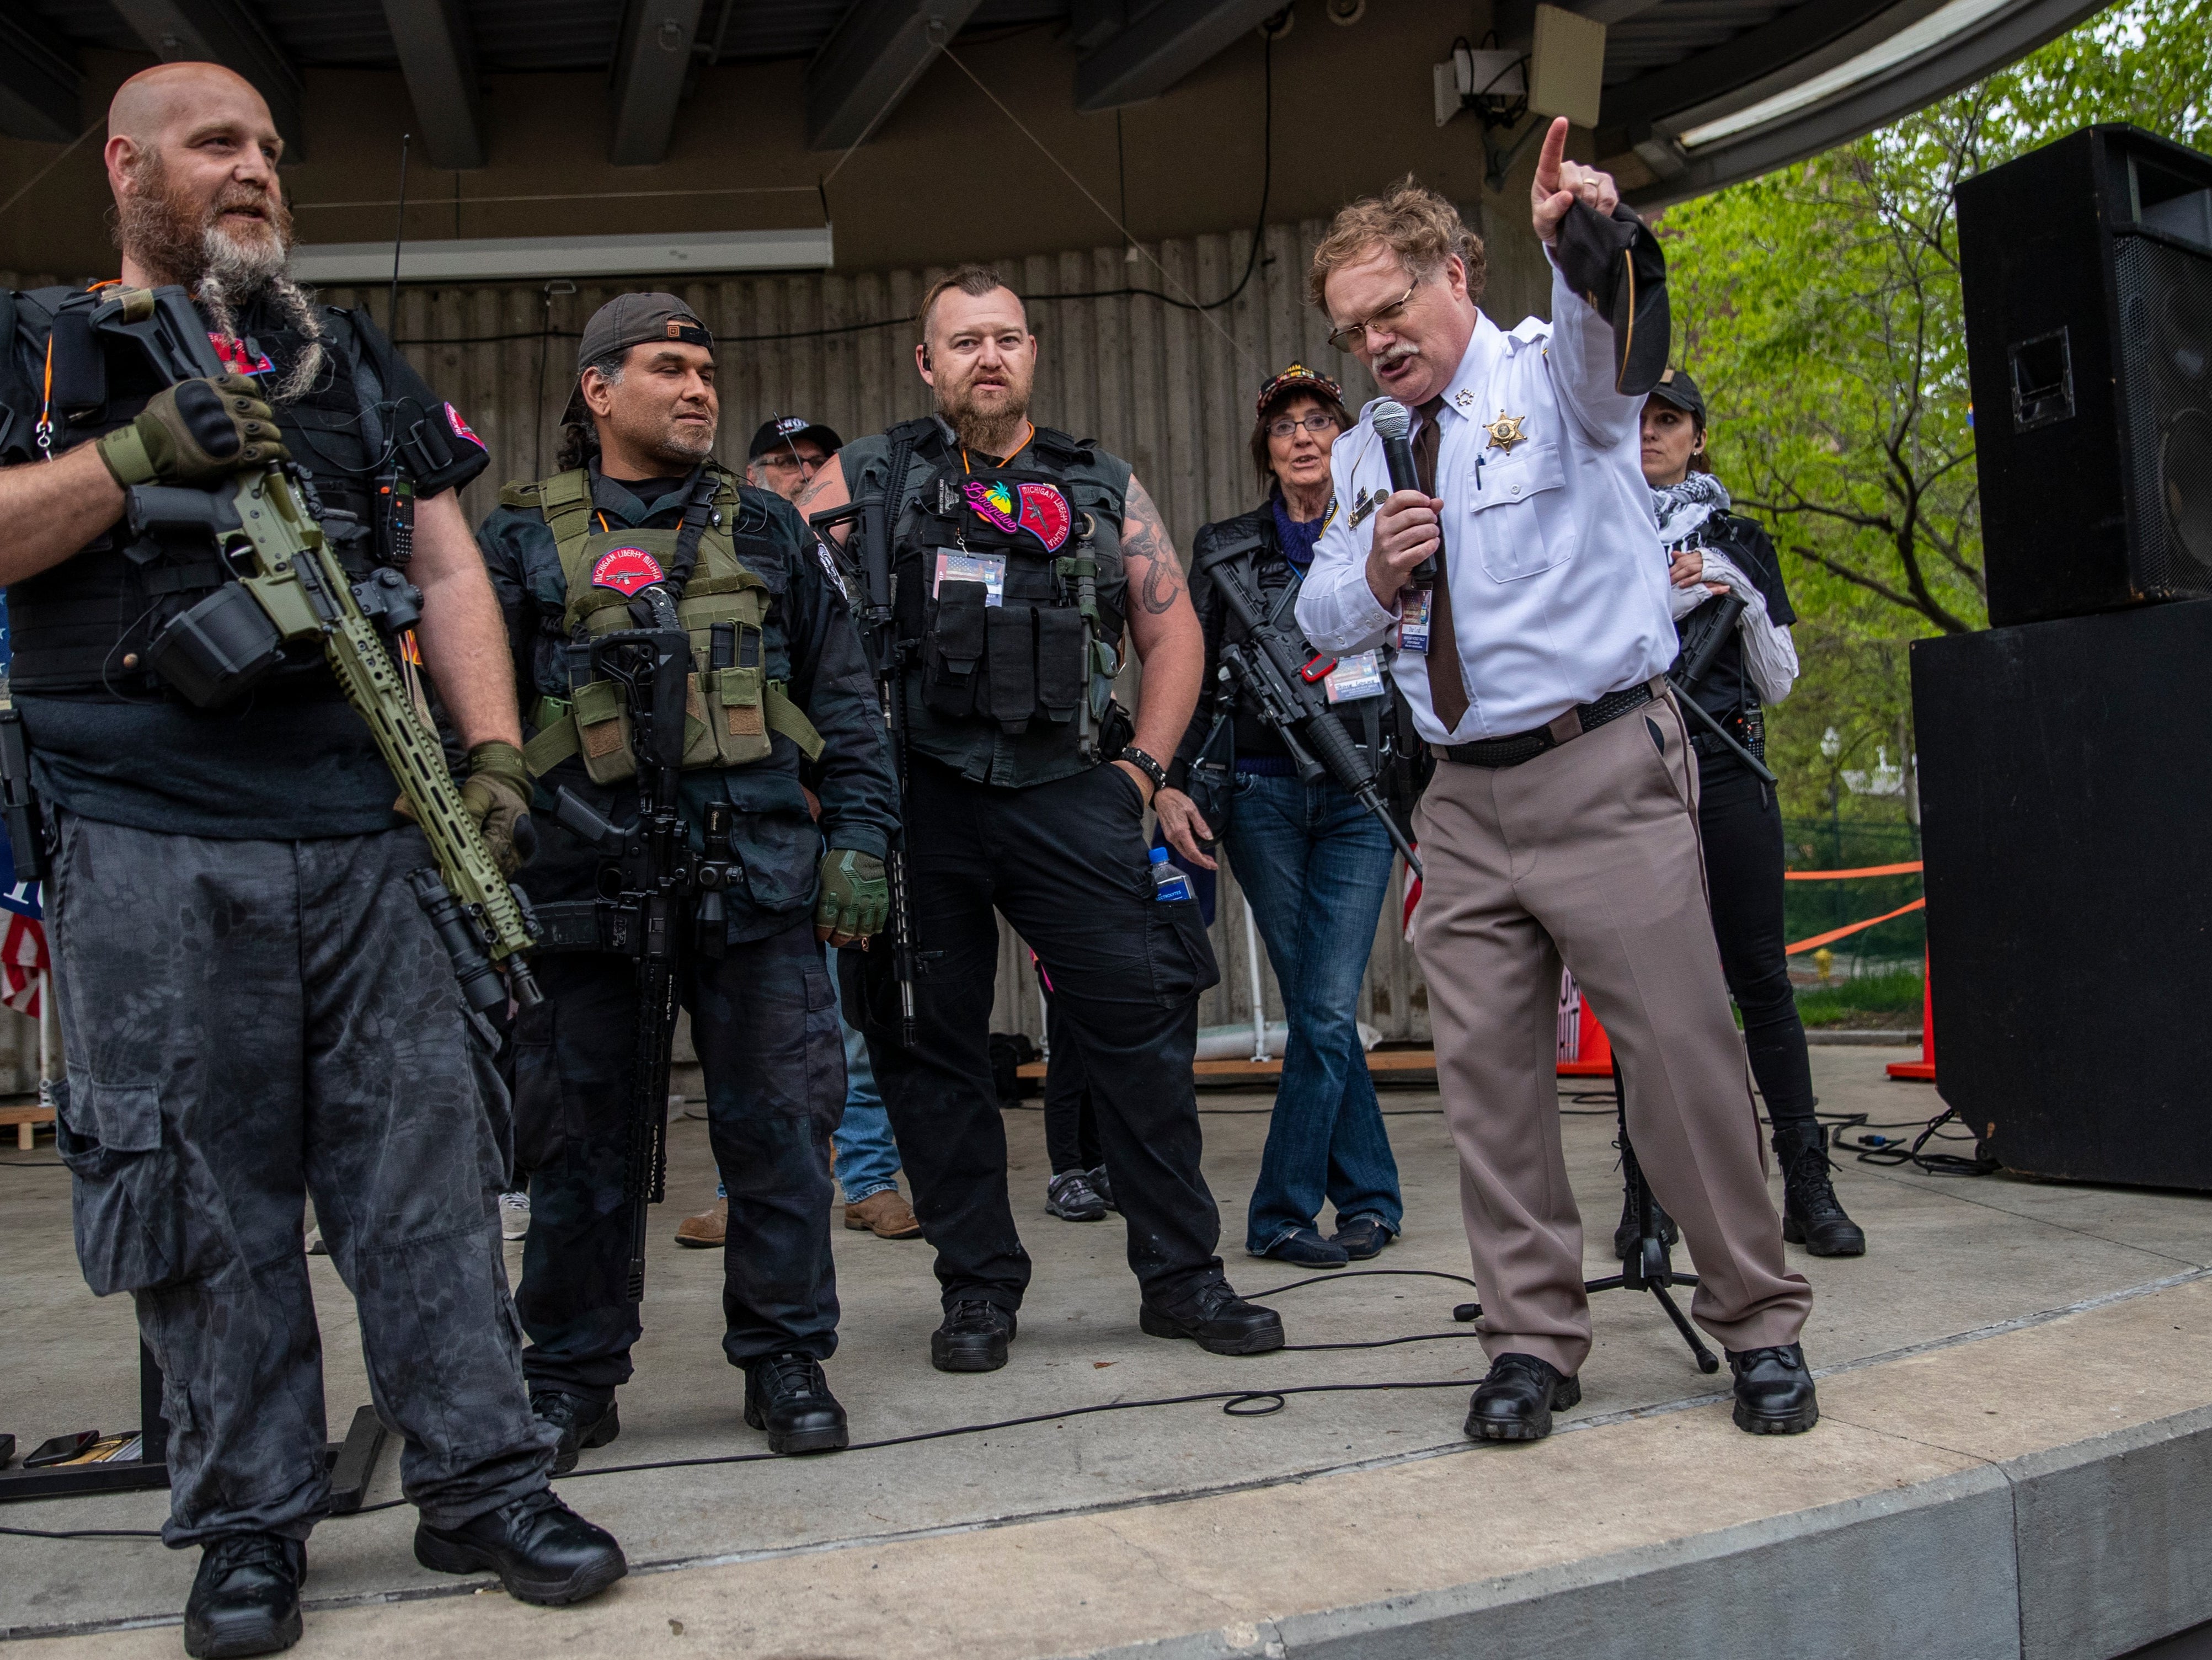 Barry County Sheriff Dar Leaf, front right, speaks next to members of the Michigan Liberty Militia during the “American Patriot Rally-Sheriffs speak out” event at Rosa Parks Circle in downtown Grand Rapids, Michigan, Monday, 18 May, 2020